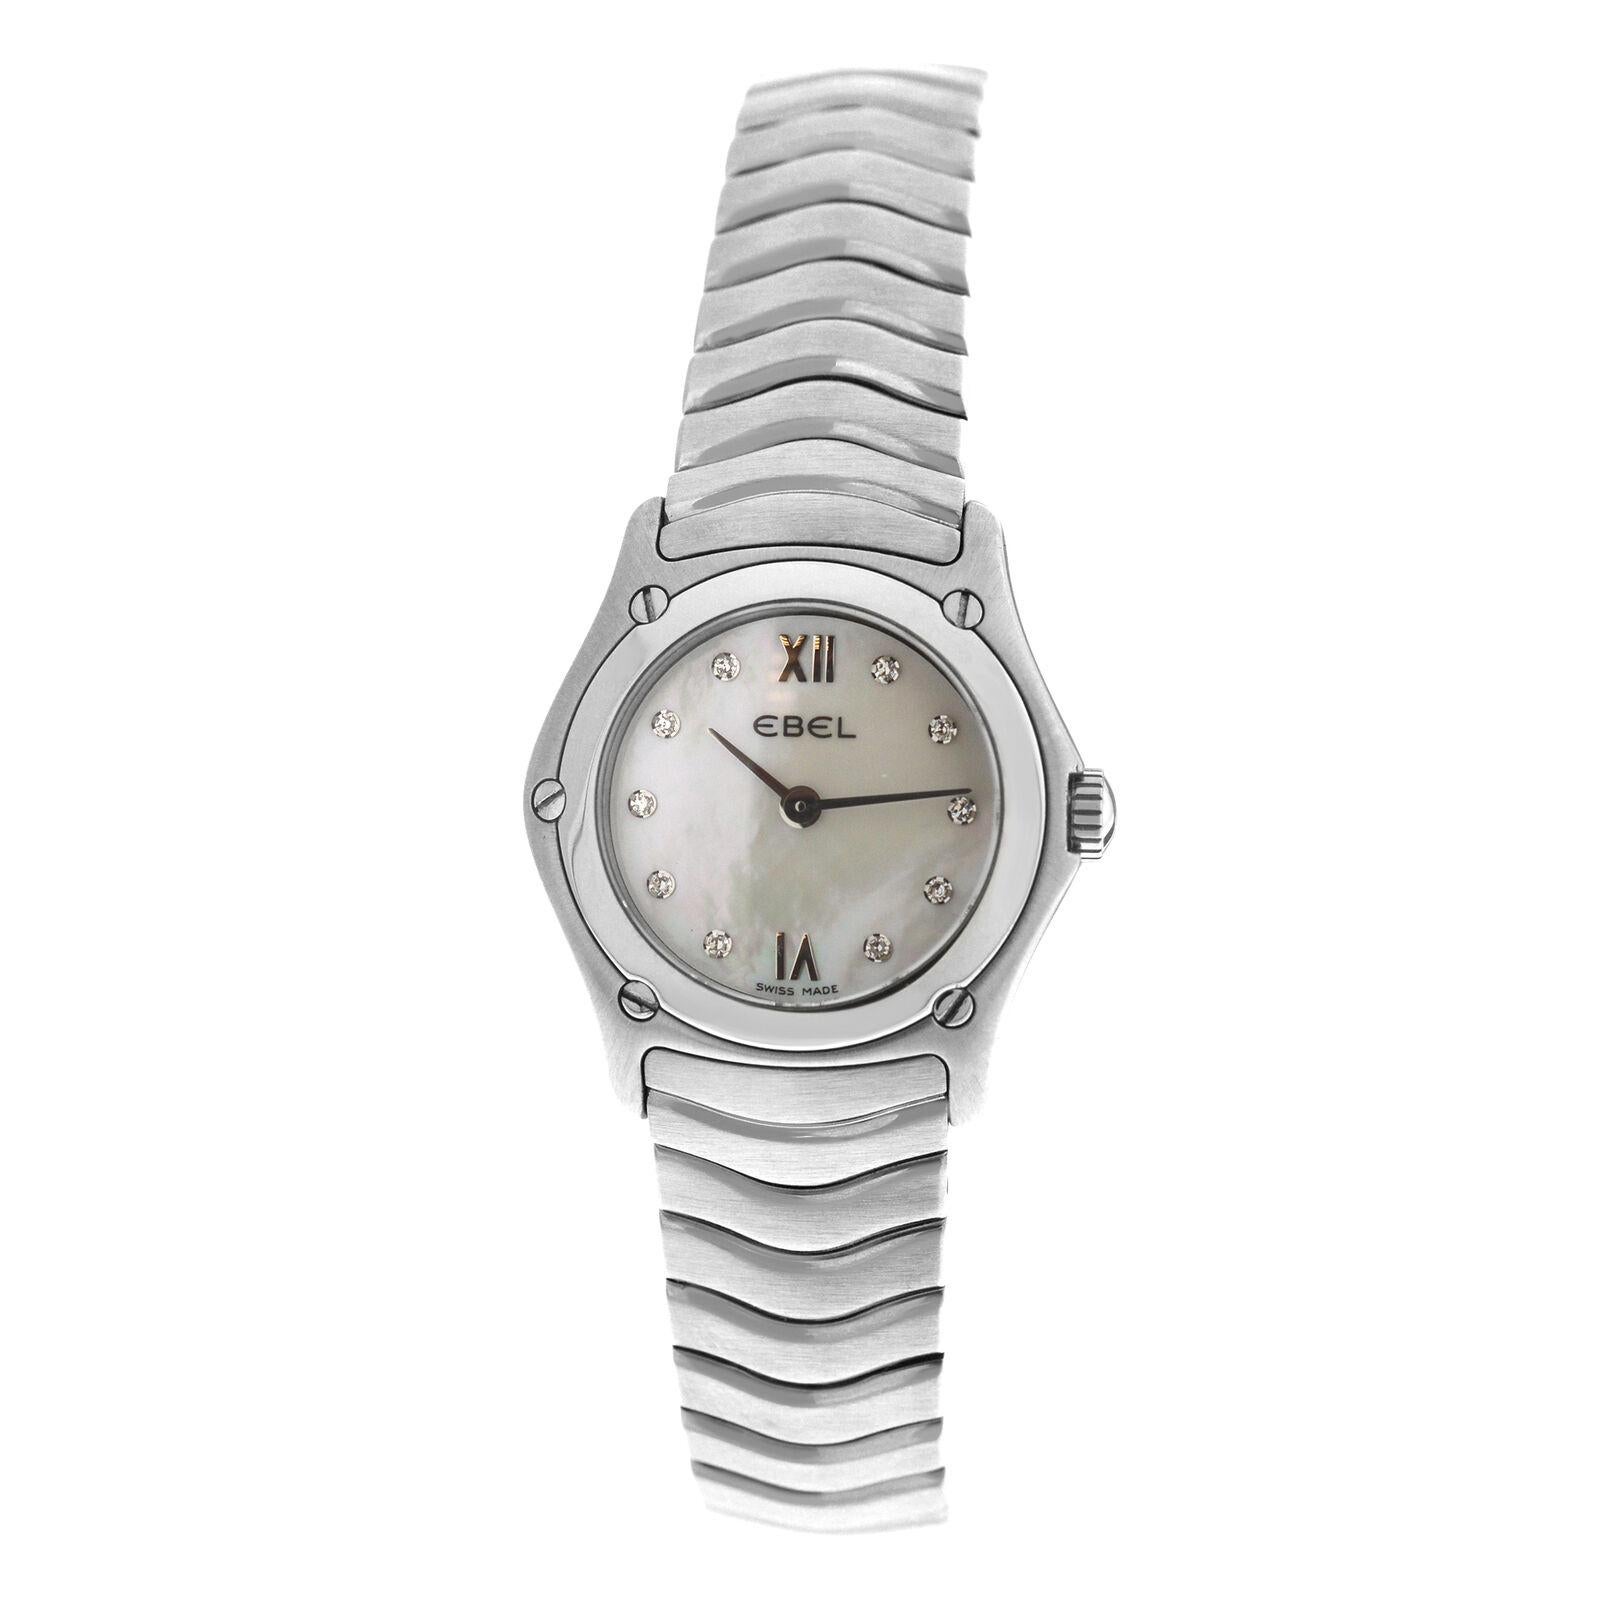 
Brand	Ebel
Model	9157F11
Gender	Ladies
Condition	New store display
Movement	Swiss Quartz
Case Material	Stainless Steel 
Bracelet / Strap Material	Stainless Steel 
Clasp / Buckle Material	Stainless Steel 
Clasp Type	Butterfly Deployment
Bracelet /